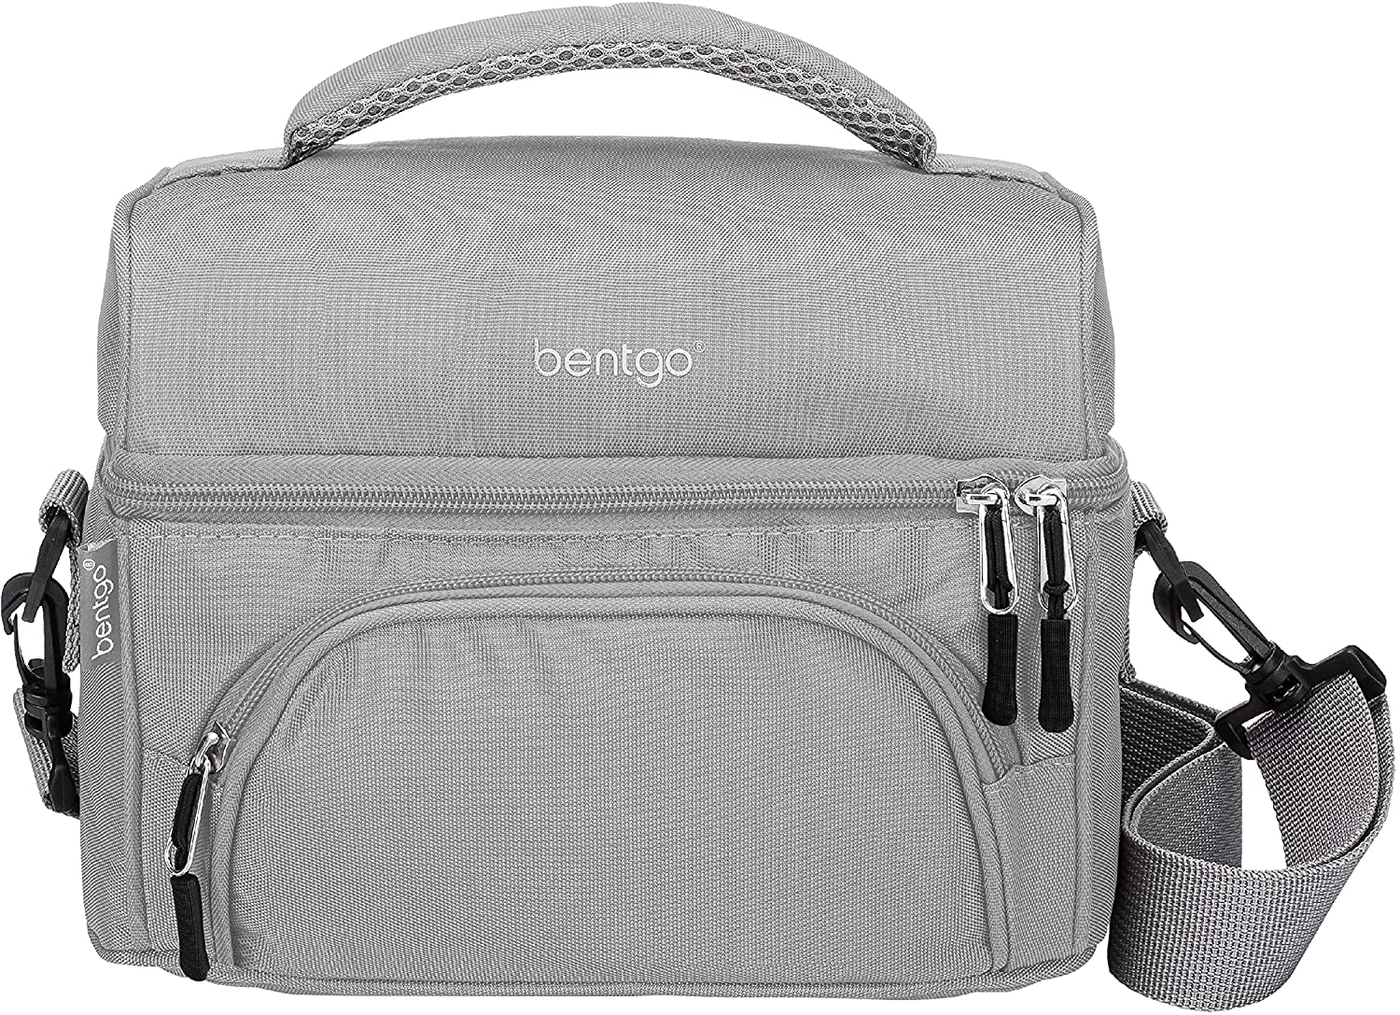 Bentgo Deluxe Lunch Bag - Durable and Insulated Lunch Tote with Zippered Outer Pocket, Internal Mesh Pocket, Padded and Adjustable Straps, & 2-Way Zippers - Fits All Bentgo Lunch Boxes (Gray)